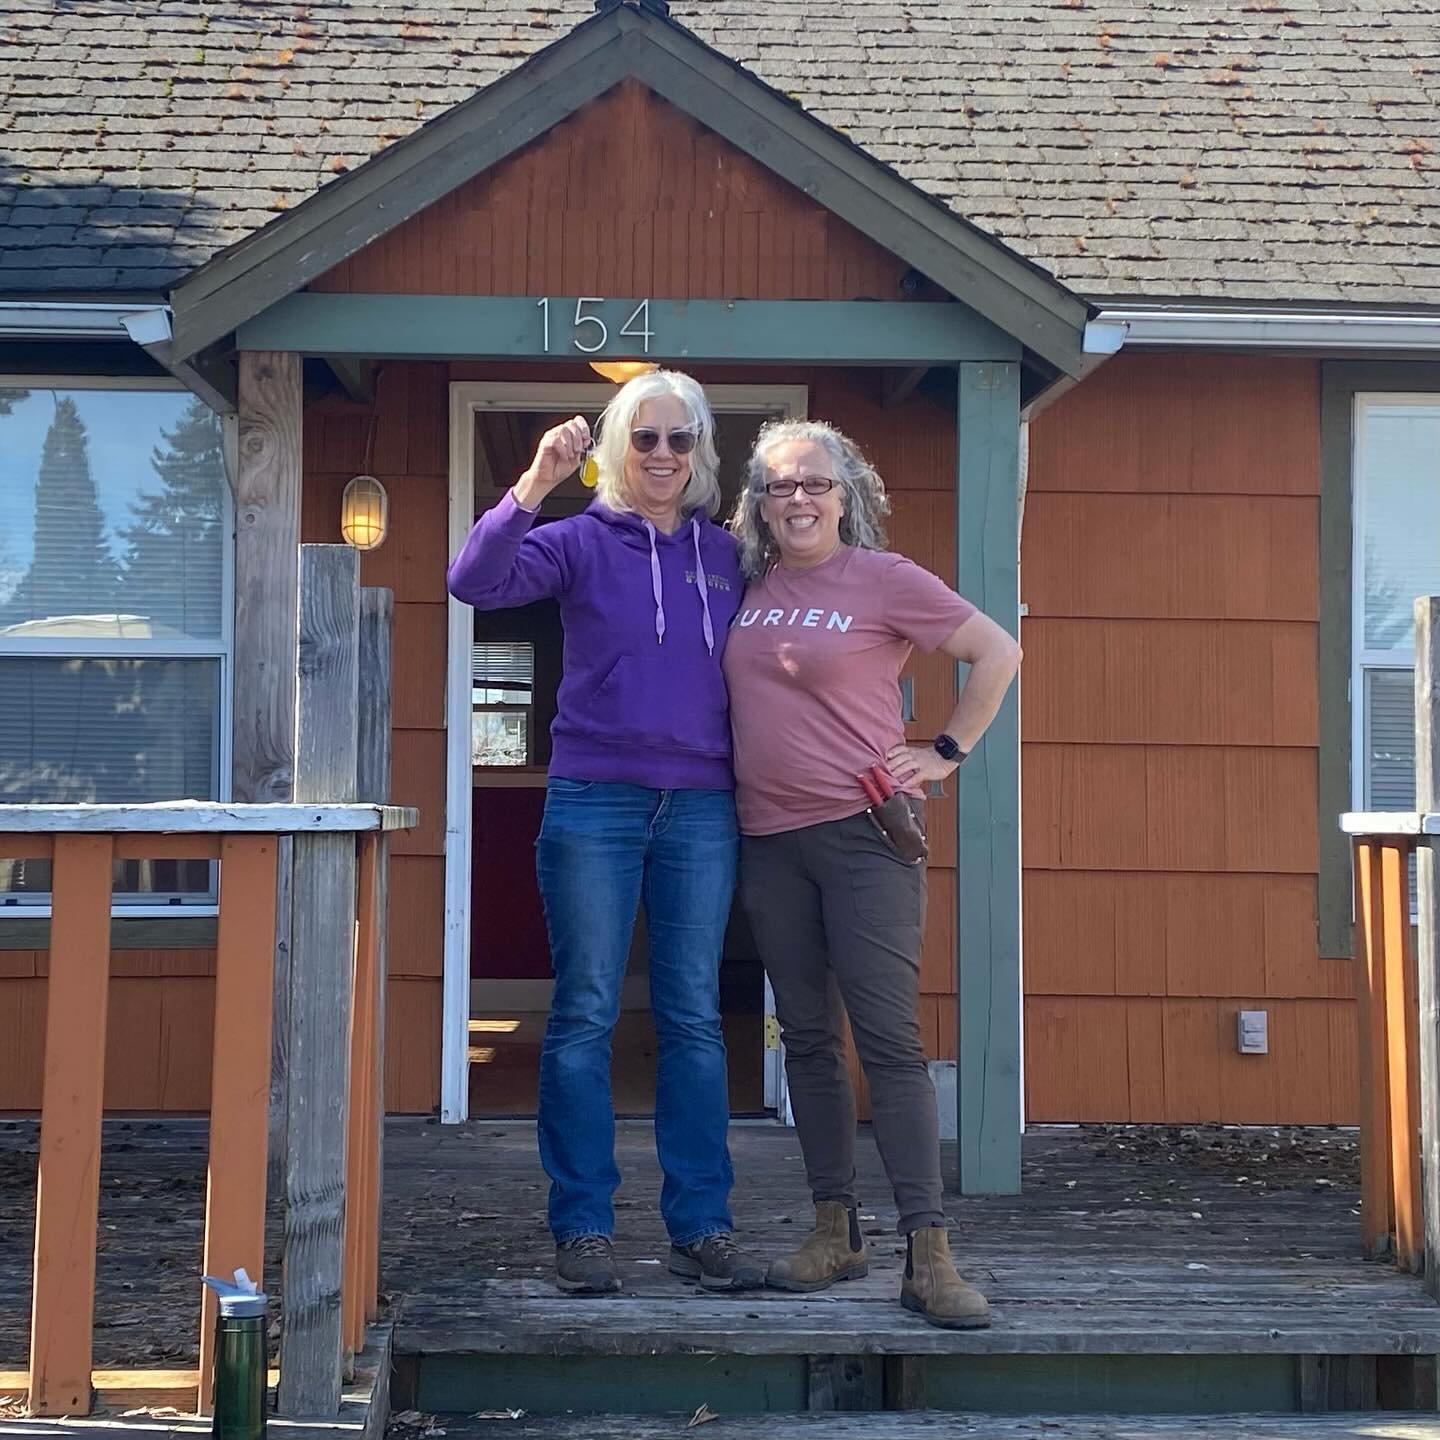 We got the keys and it&rsquo;s happening!! Jane and Patty have purchased this property in downtown Burien and are opening our very own nursery called HUCKLEBERRY GARDENS! We have tons of work to do but hoping to have a soft opening in a couple weeks.